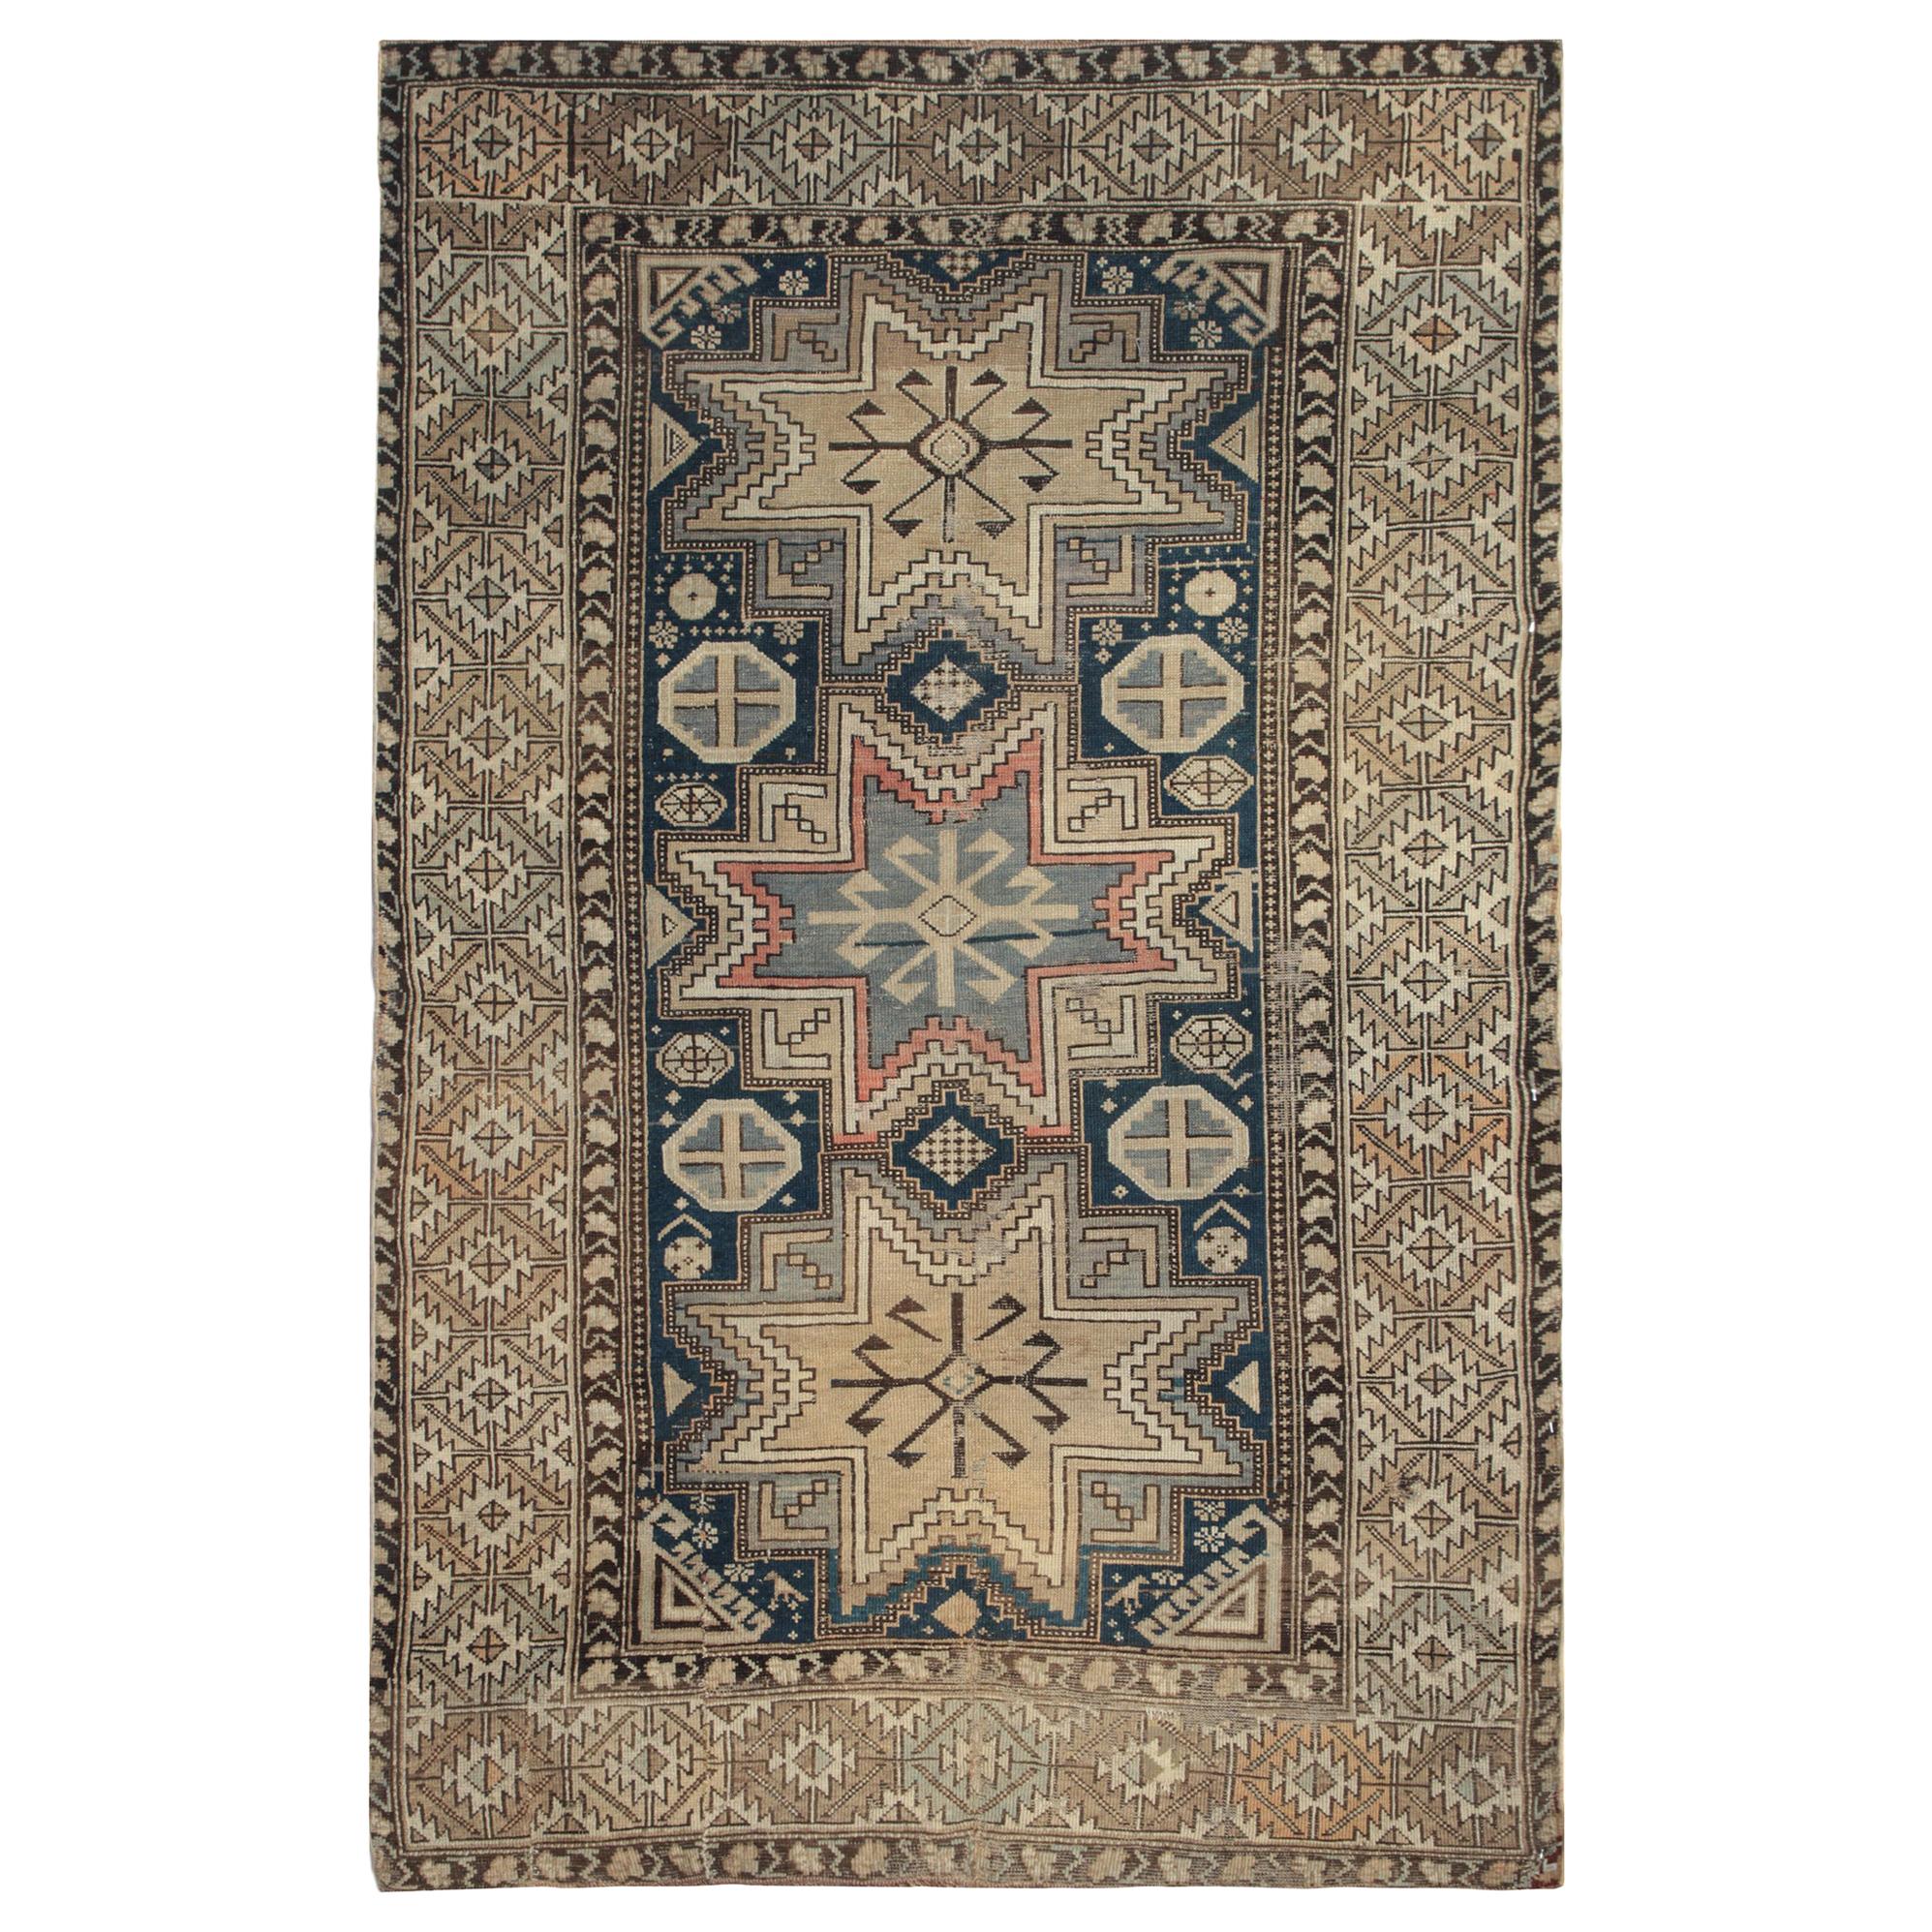 Grey Area Rugs for Sale, Antique Rugs Caucasian Carpet, Wool Living Room Rugs